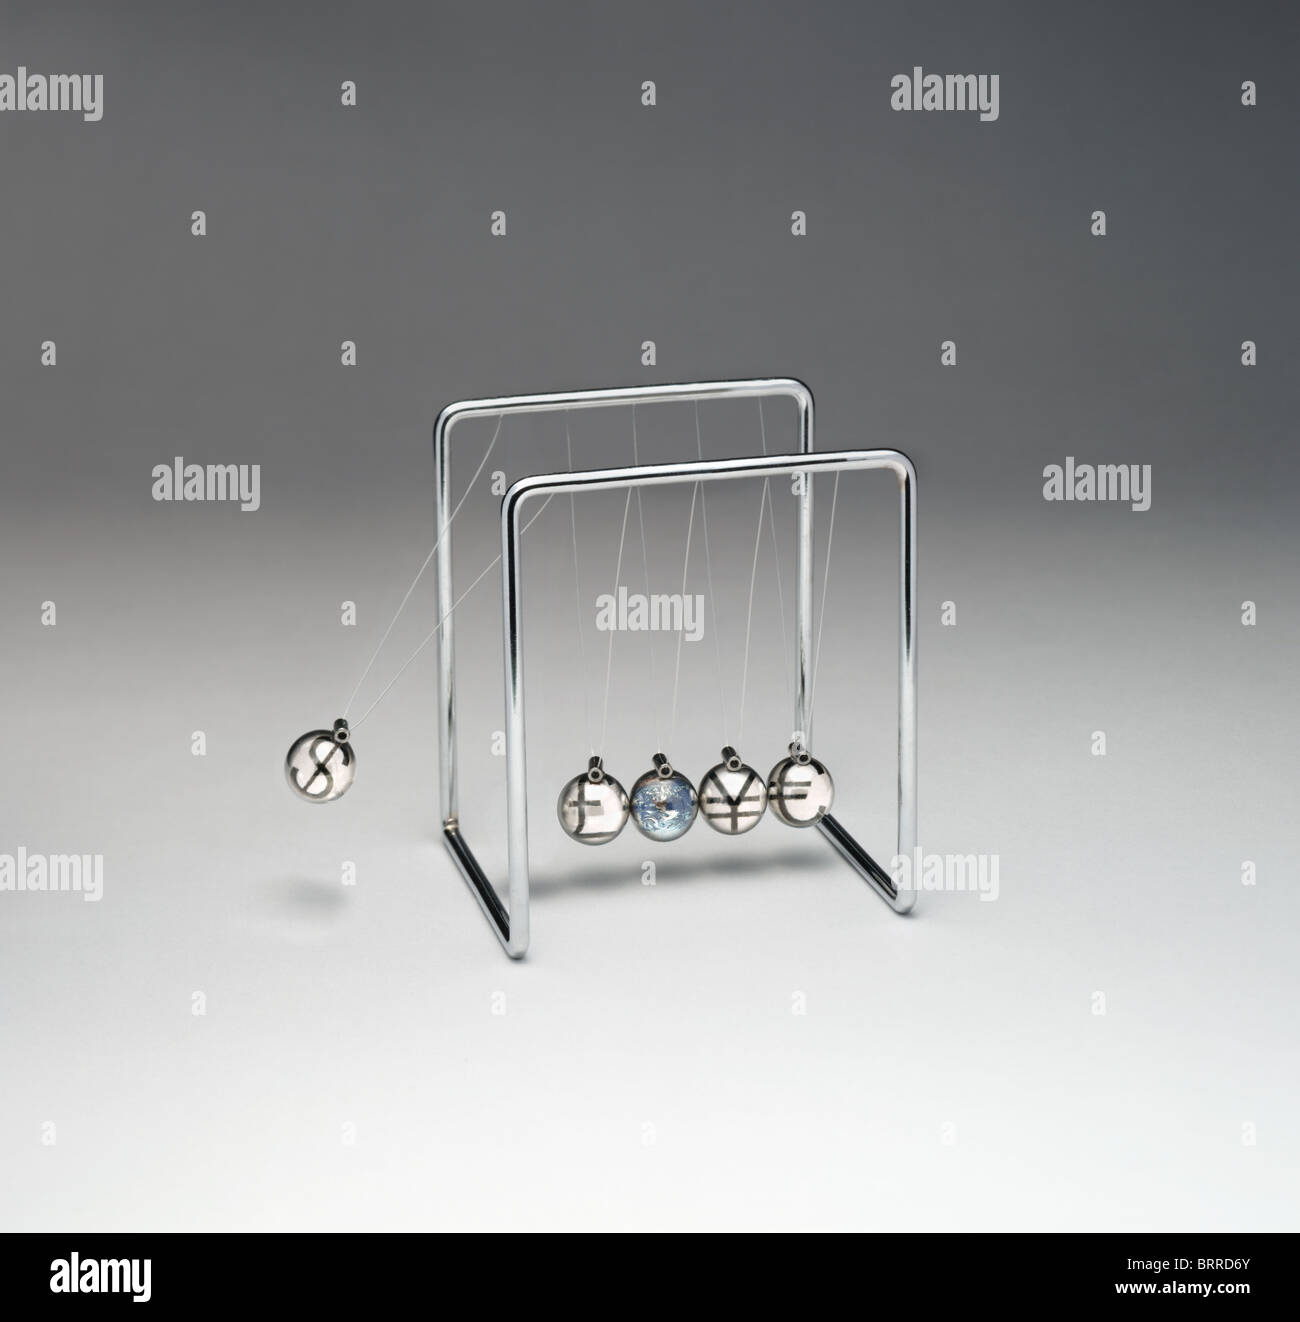 Newton's Cradle with currency symbols Stock Photo